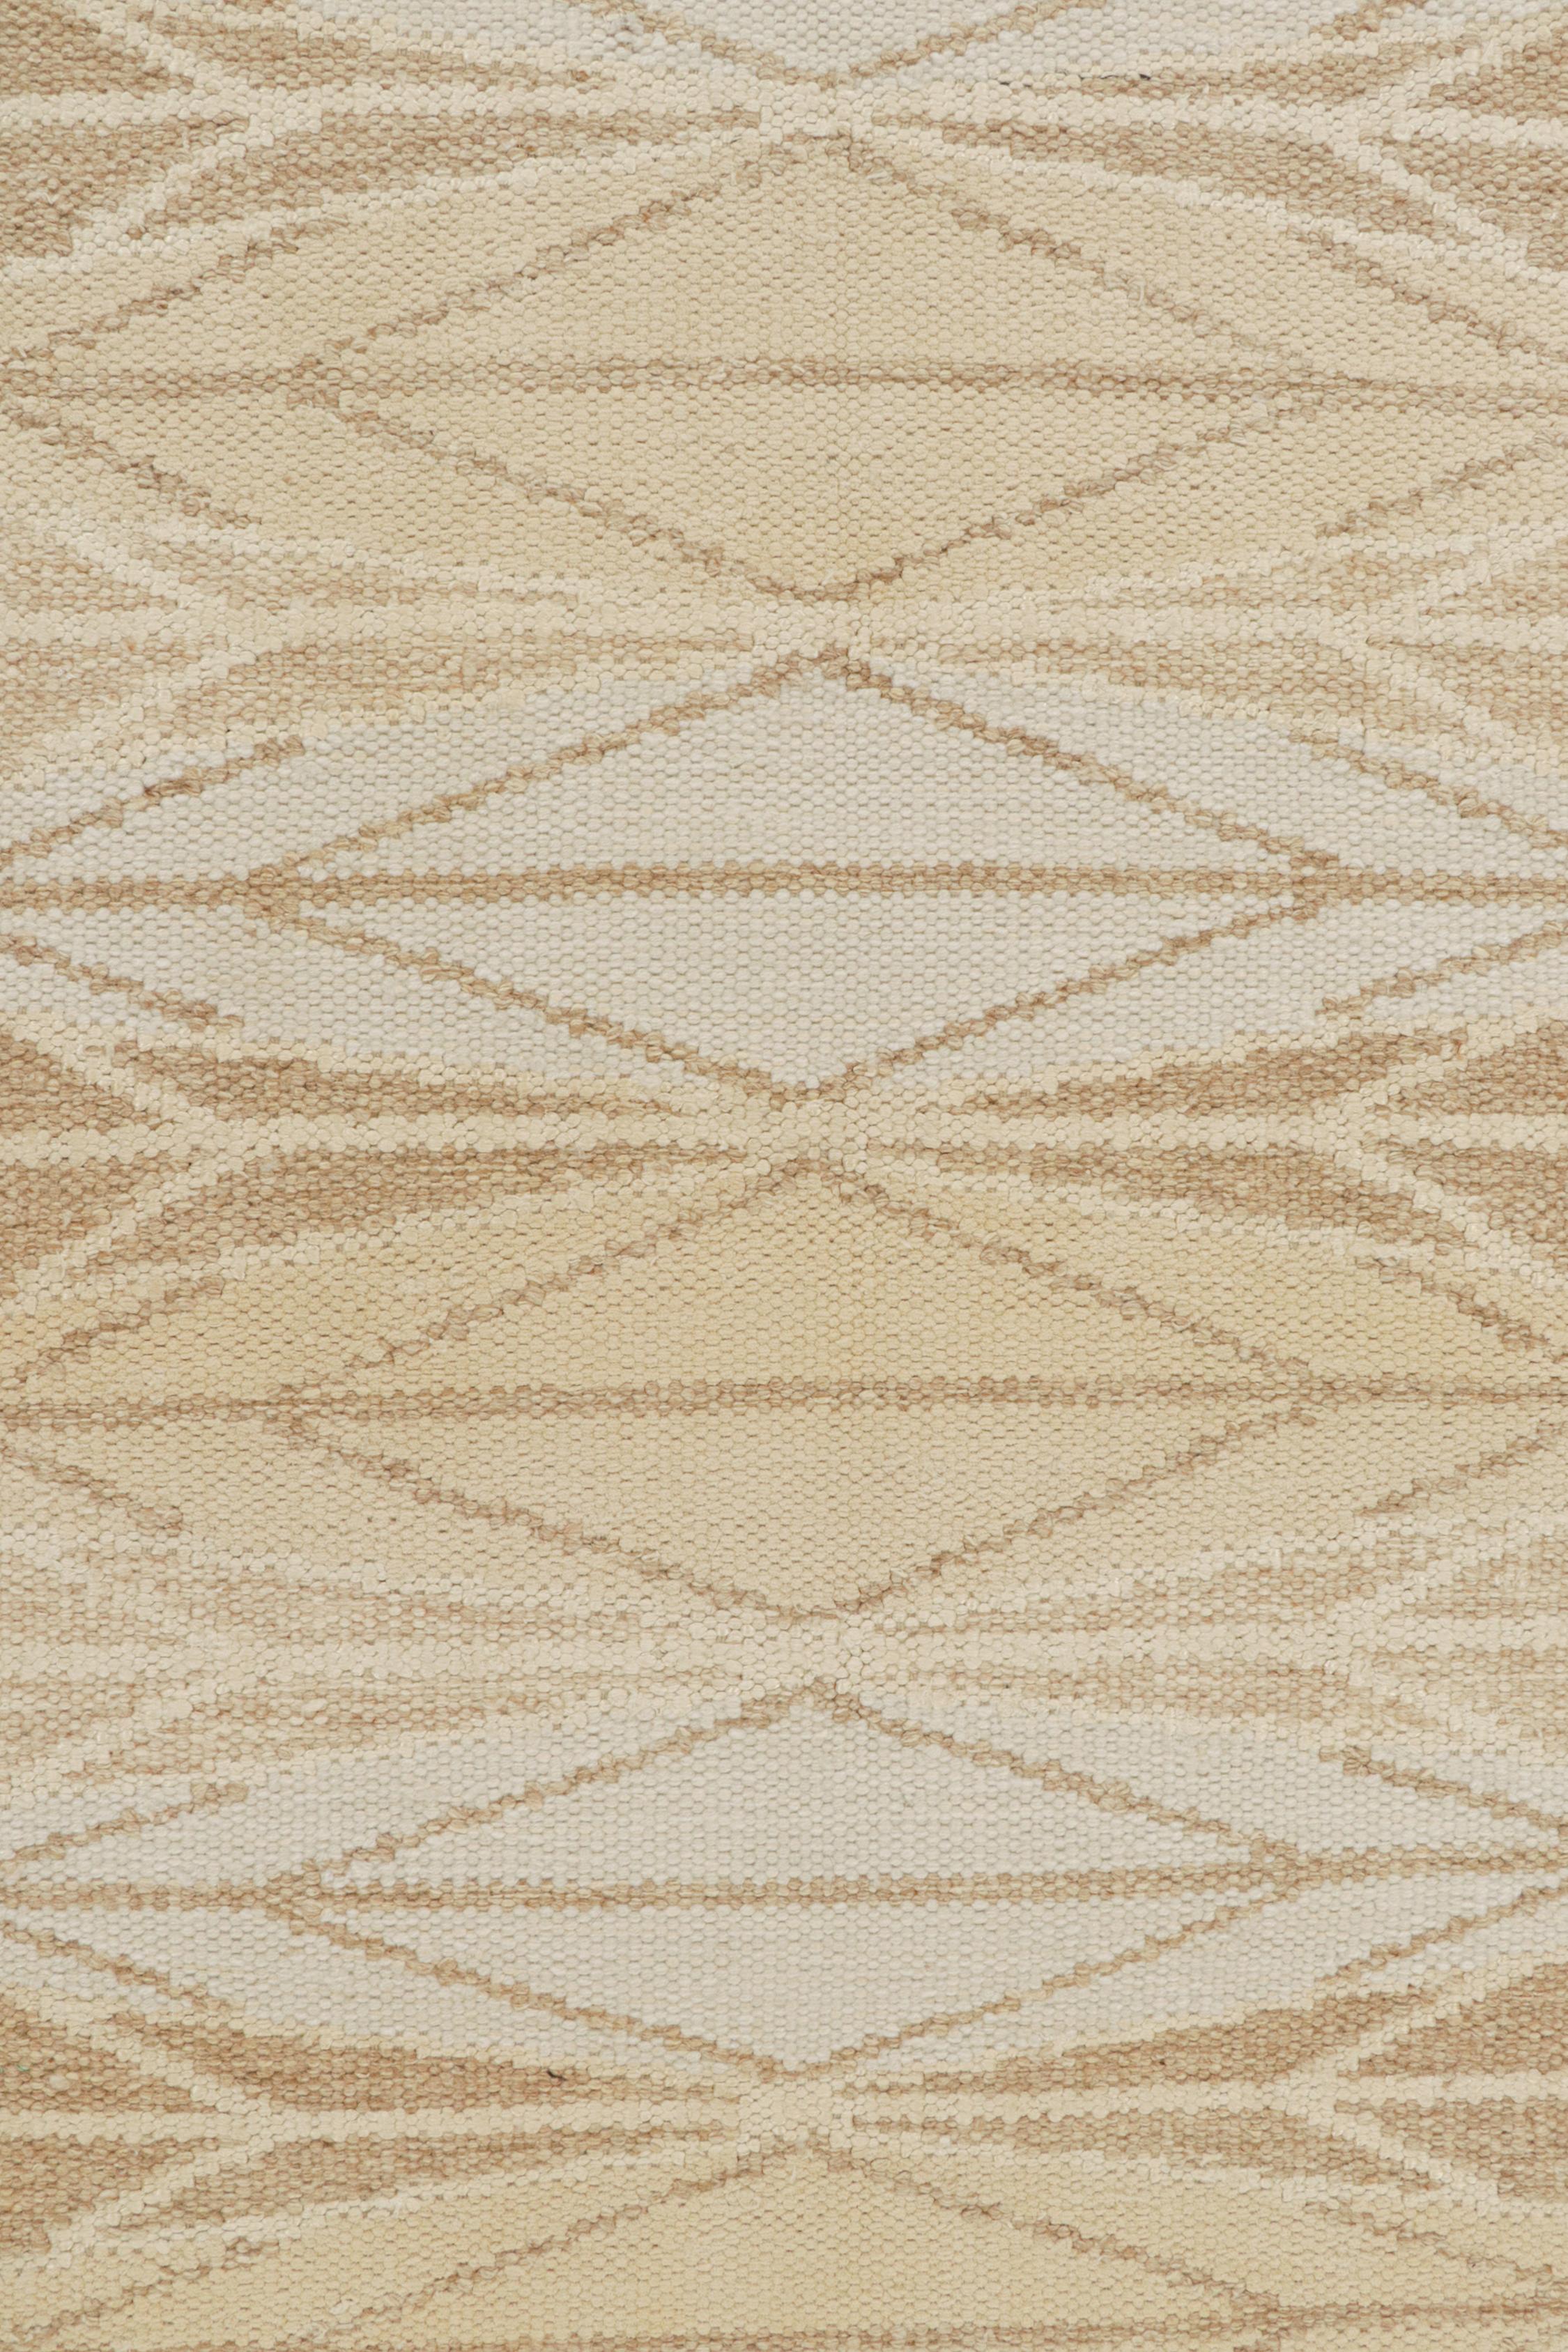 Rug & Kilim’s Scandinavian Style Kilim in Beige-Brown & White Geometric Pattern In New Condition For Sale In Long Island City, NY